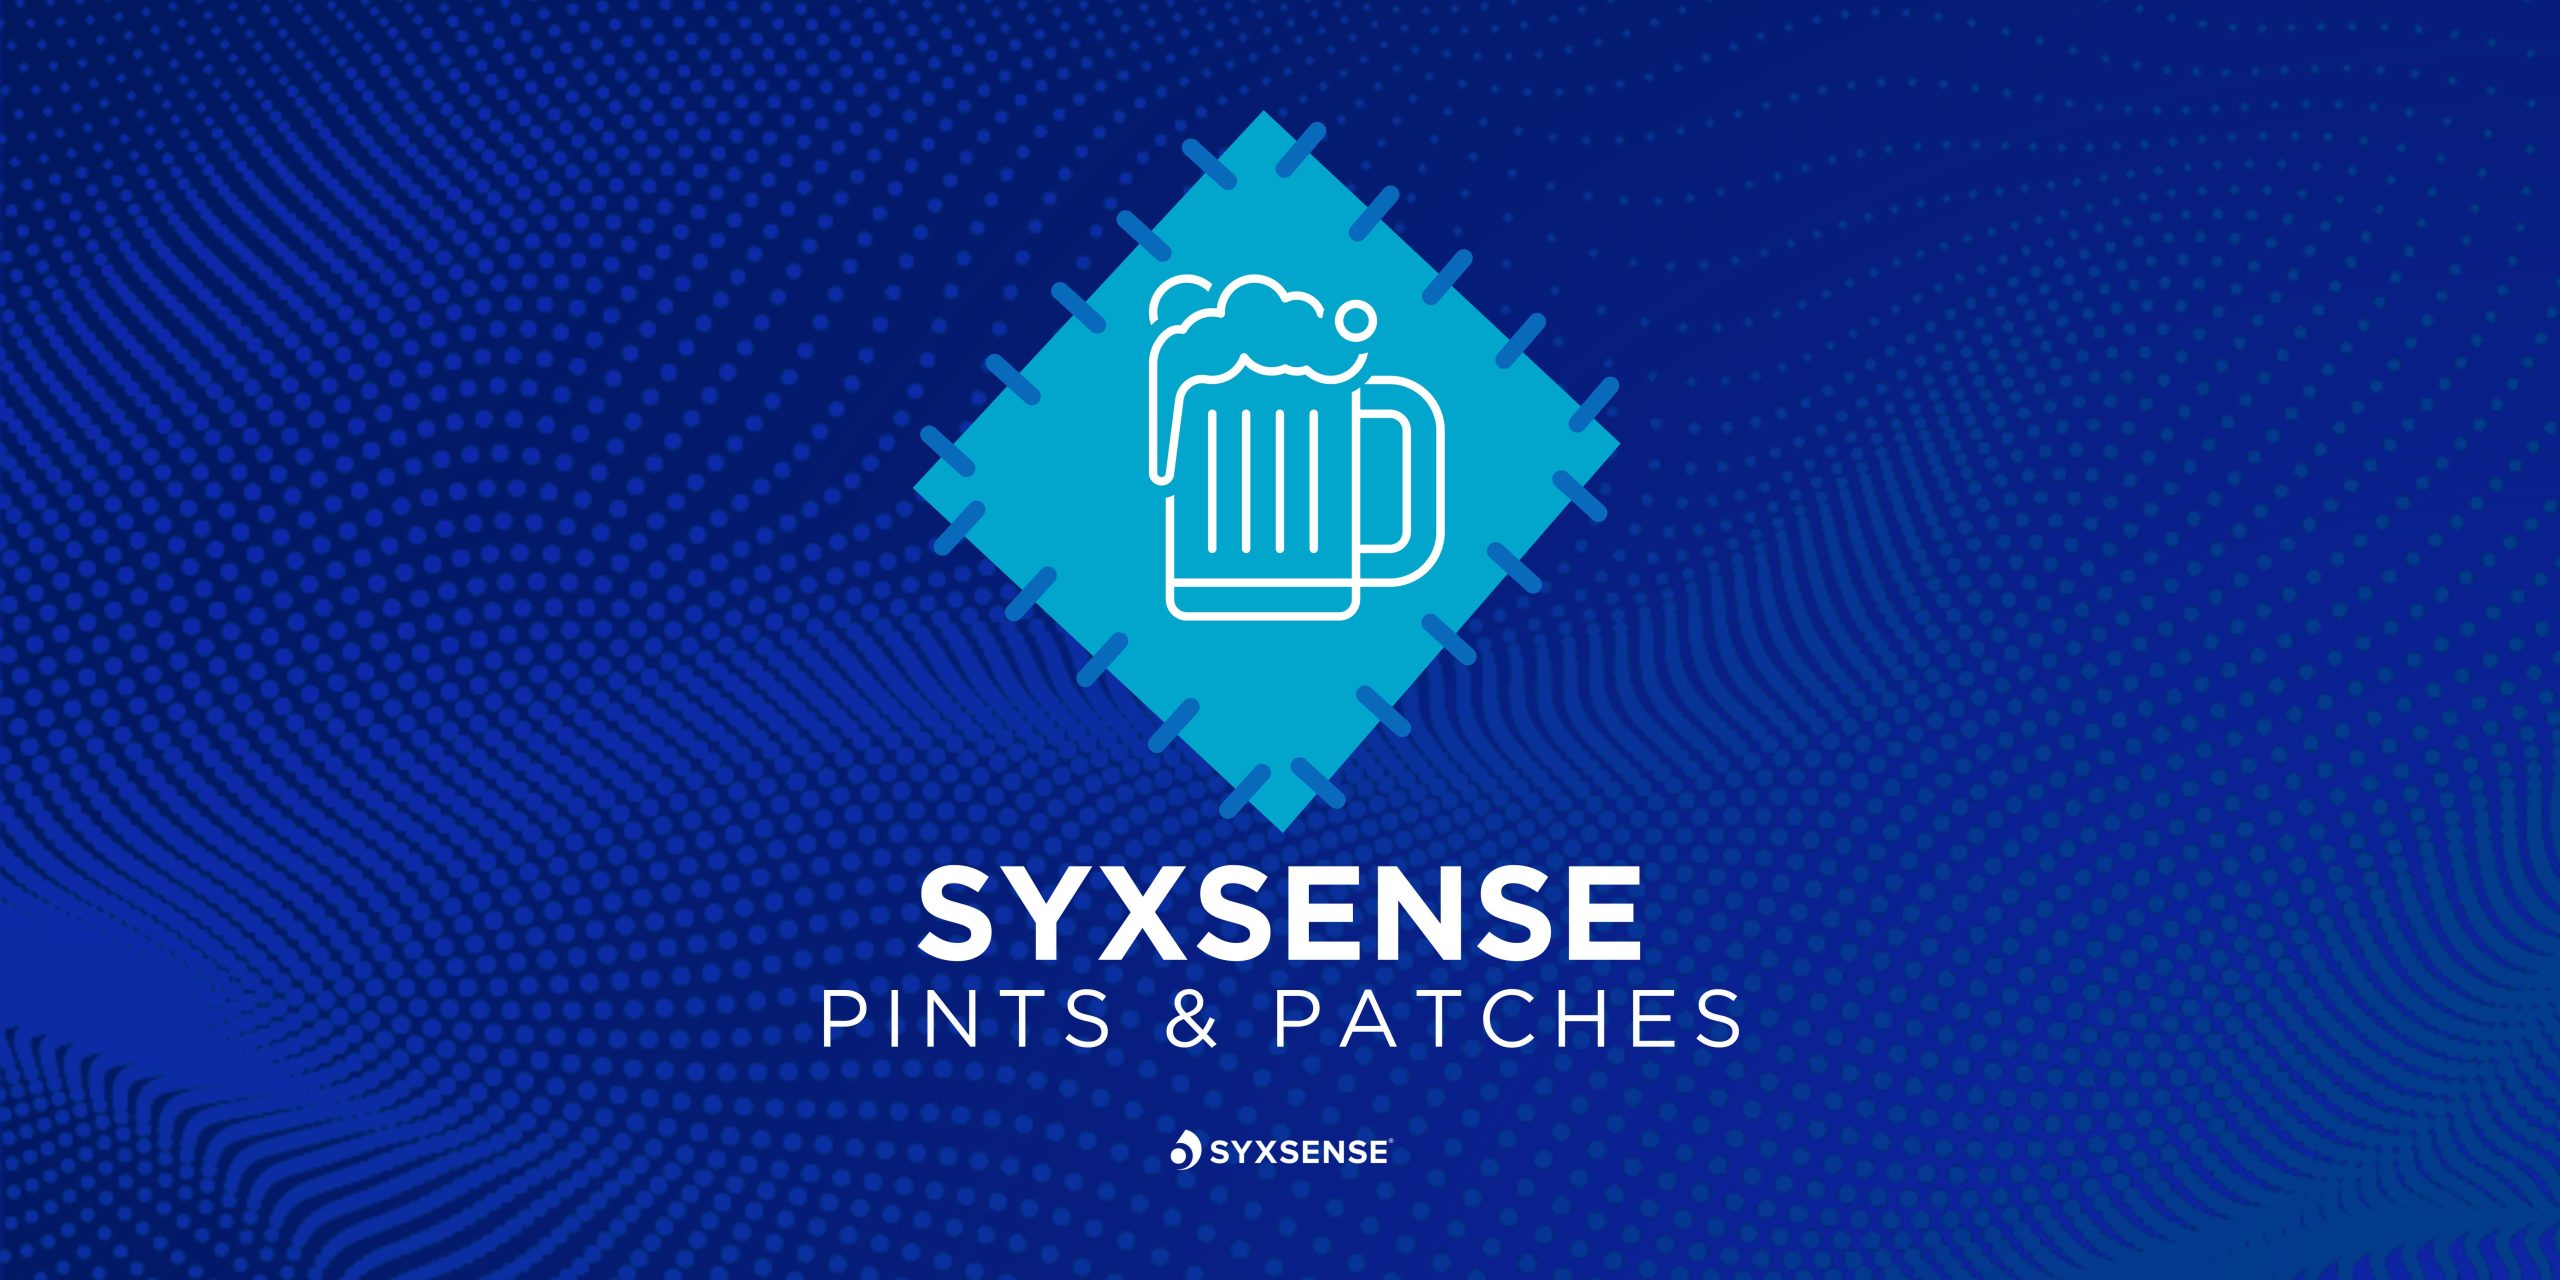 pints-and-patches